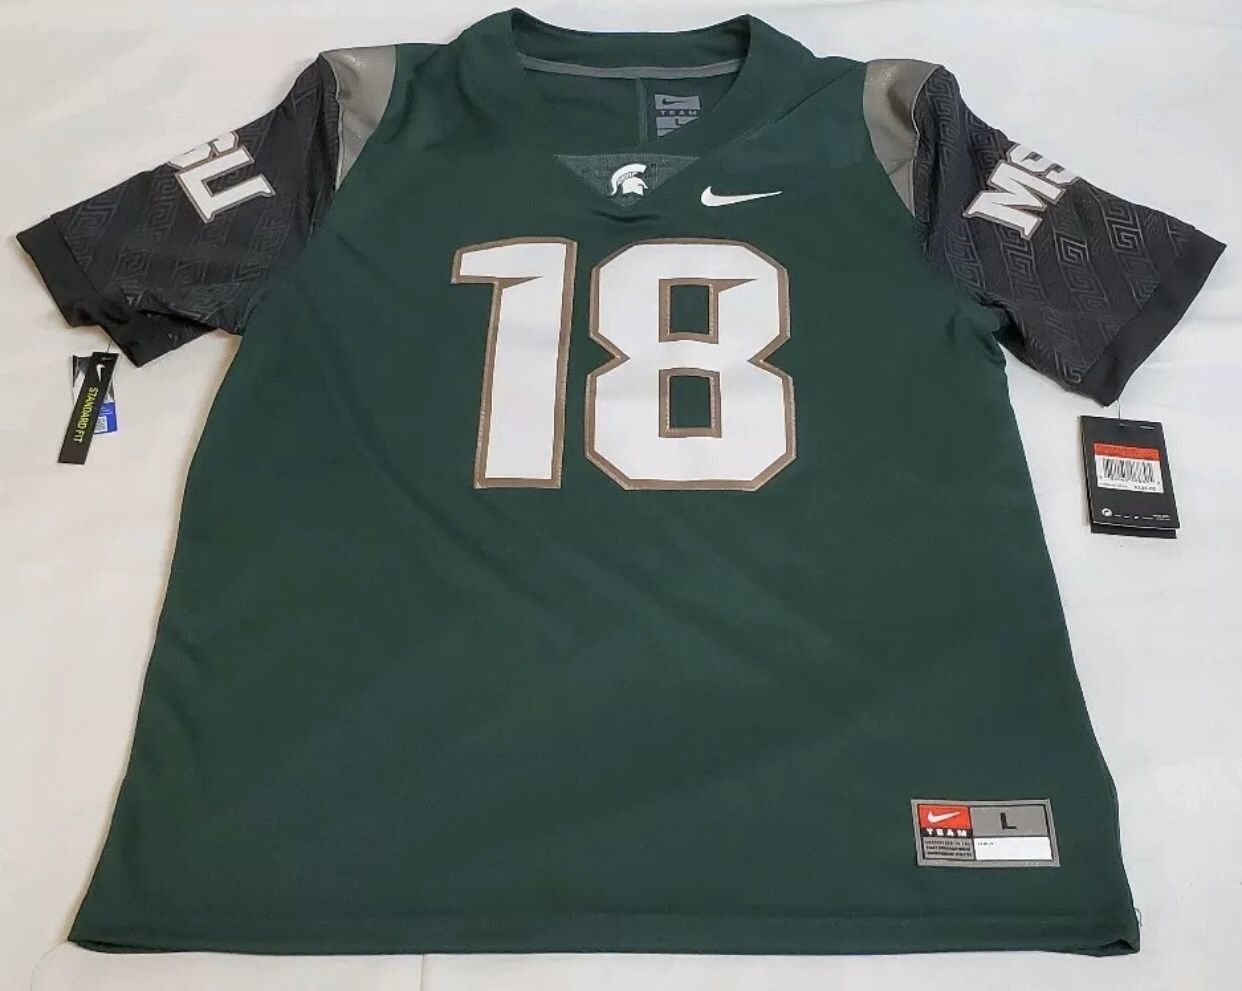 New Nike Michigan State Spartans Football #18 Limited Sewn Jersey Mens